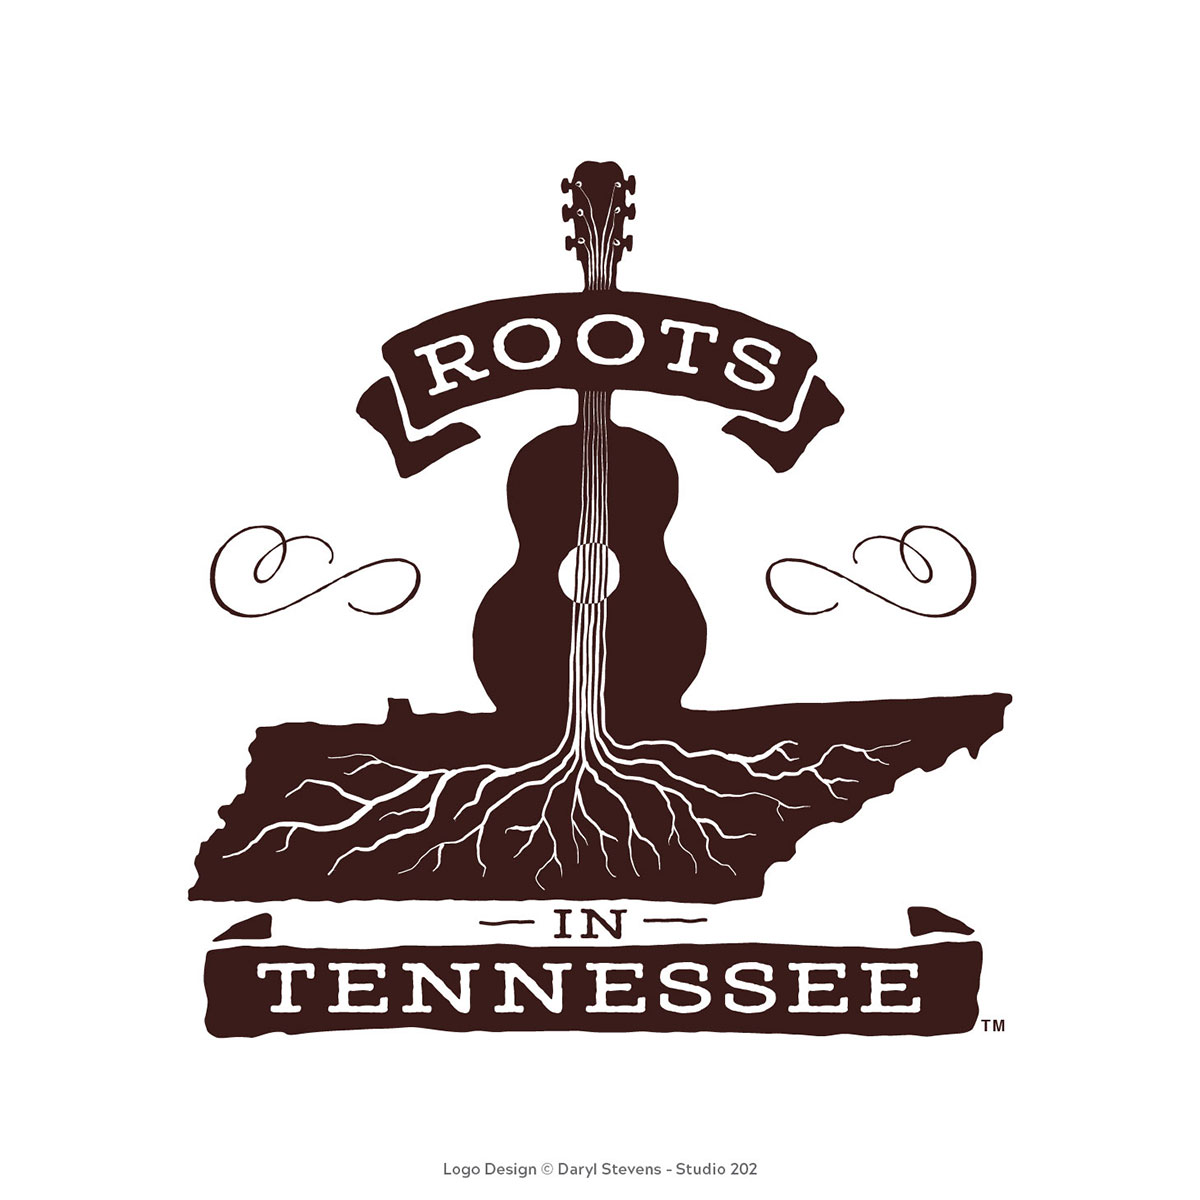 Roots In Tennessee logo design by Daryl Stevens